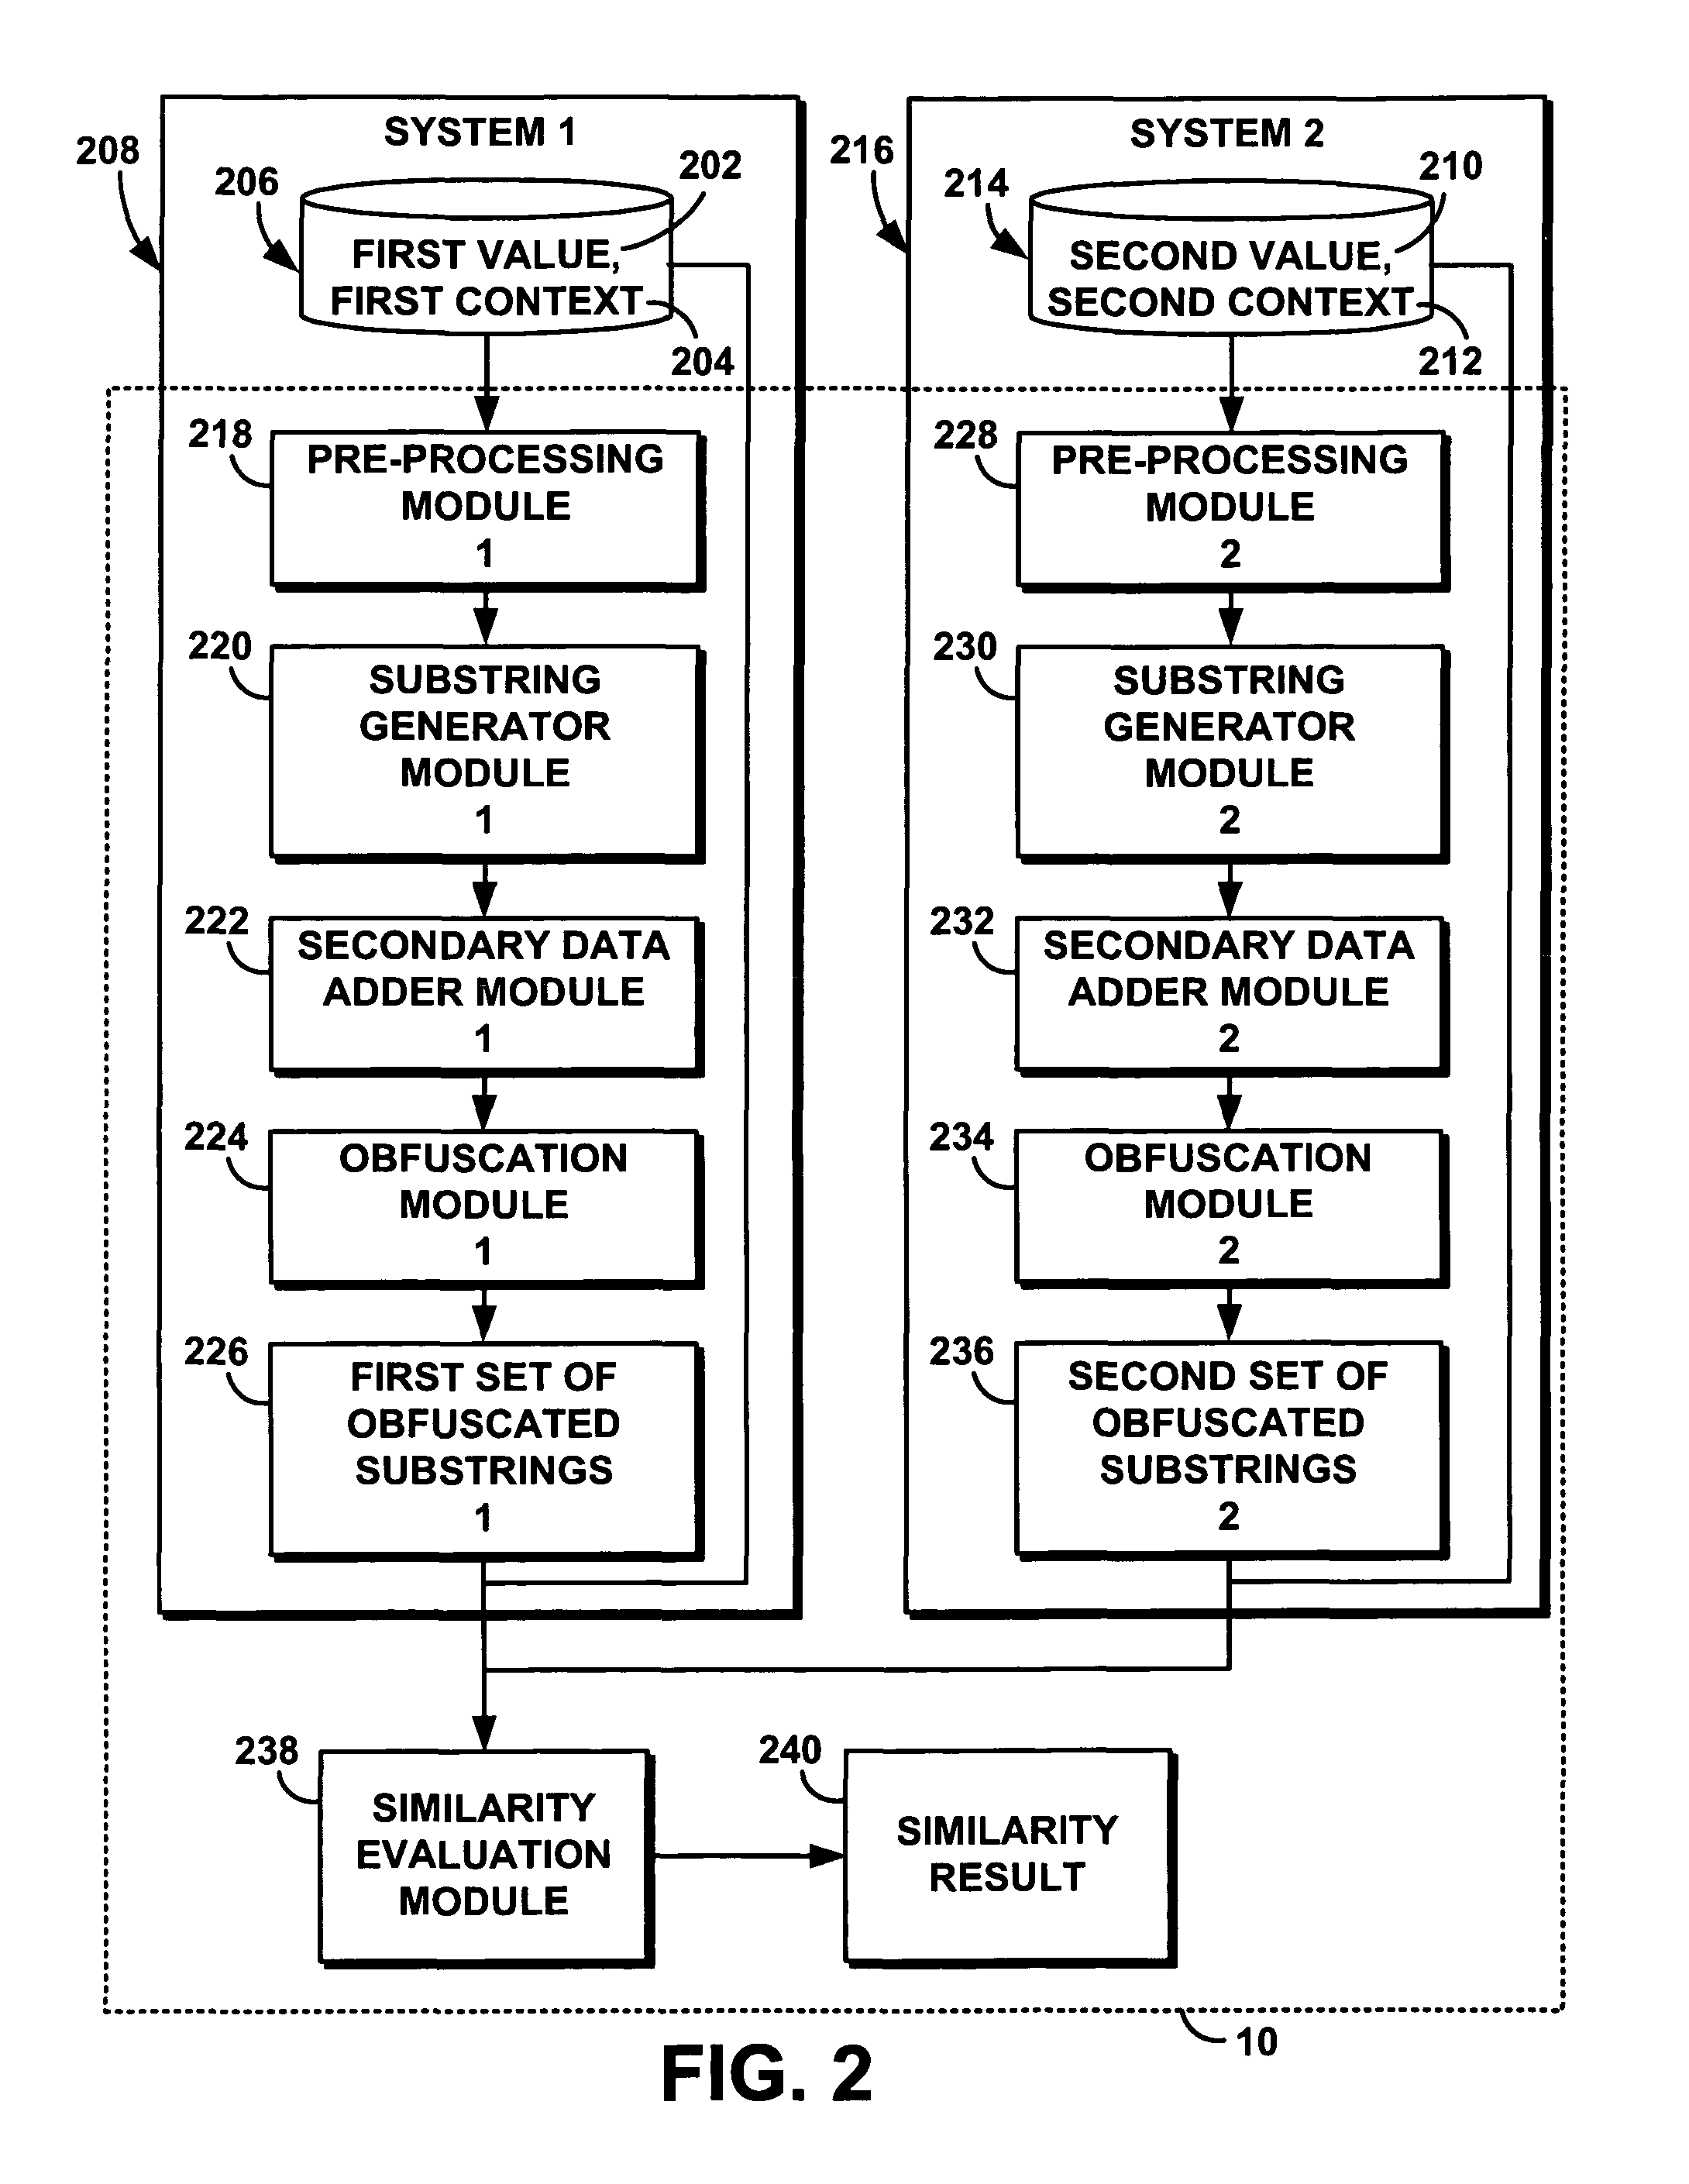 System and method for performing a similarity measure of anonymized data